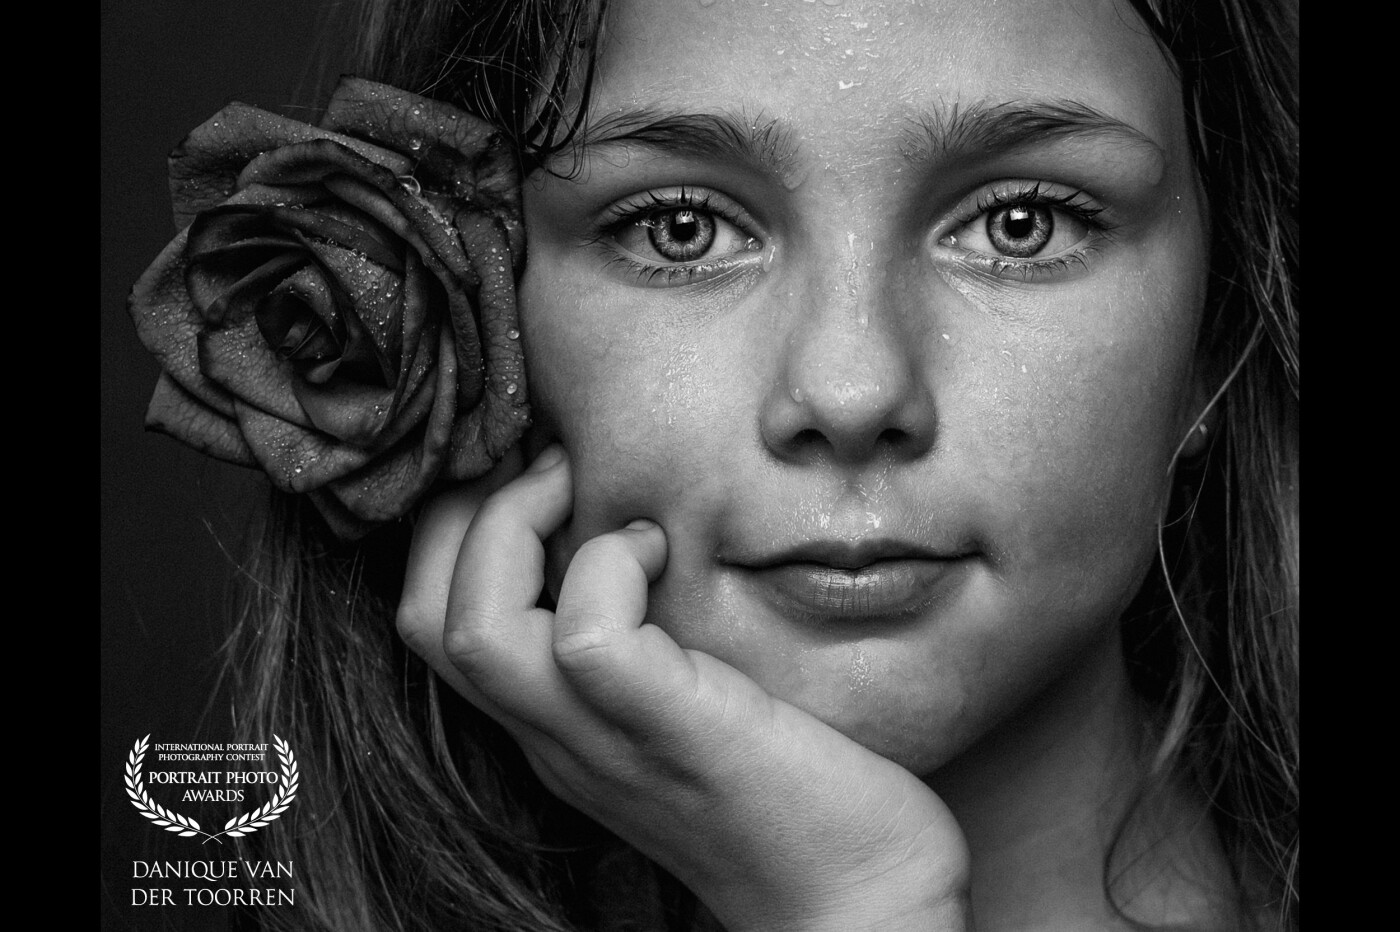 I'm so proud of my little daughter.<br />
She is the perfect model for me that i use by testing different styles and shots.<br />
This portrait of Ravenna is created in my studio.<br />
<br />
Model: Ravenna<br />
Photographer & Lightroom edit: @Daniquevdtphotography